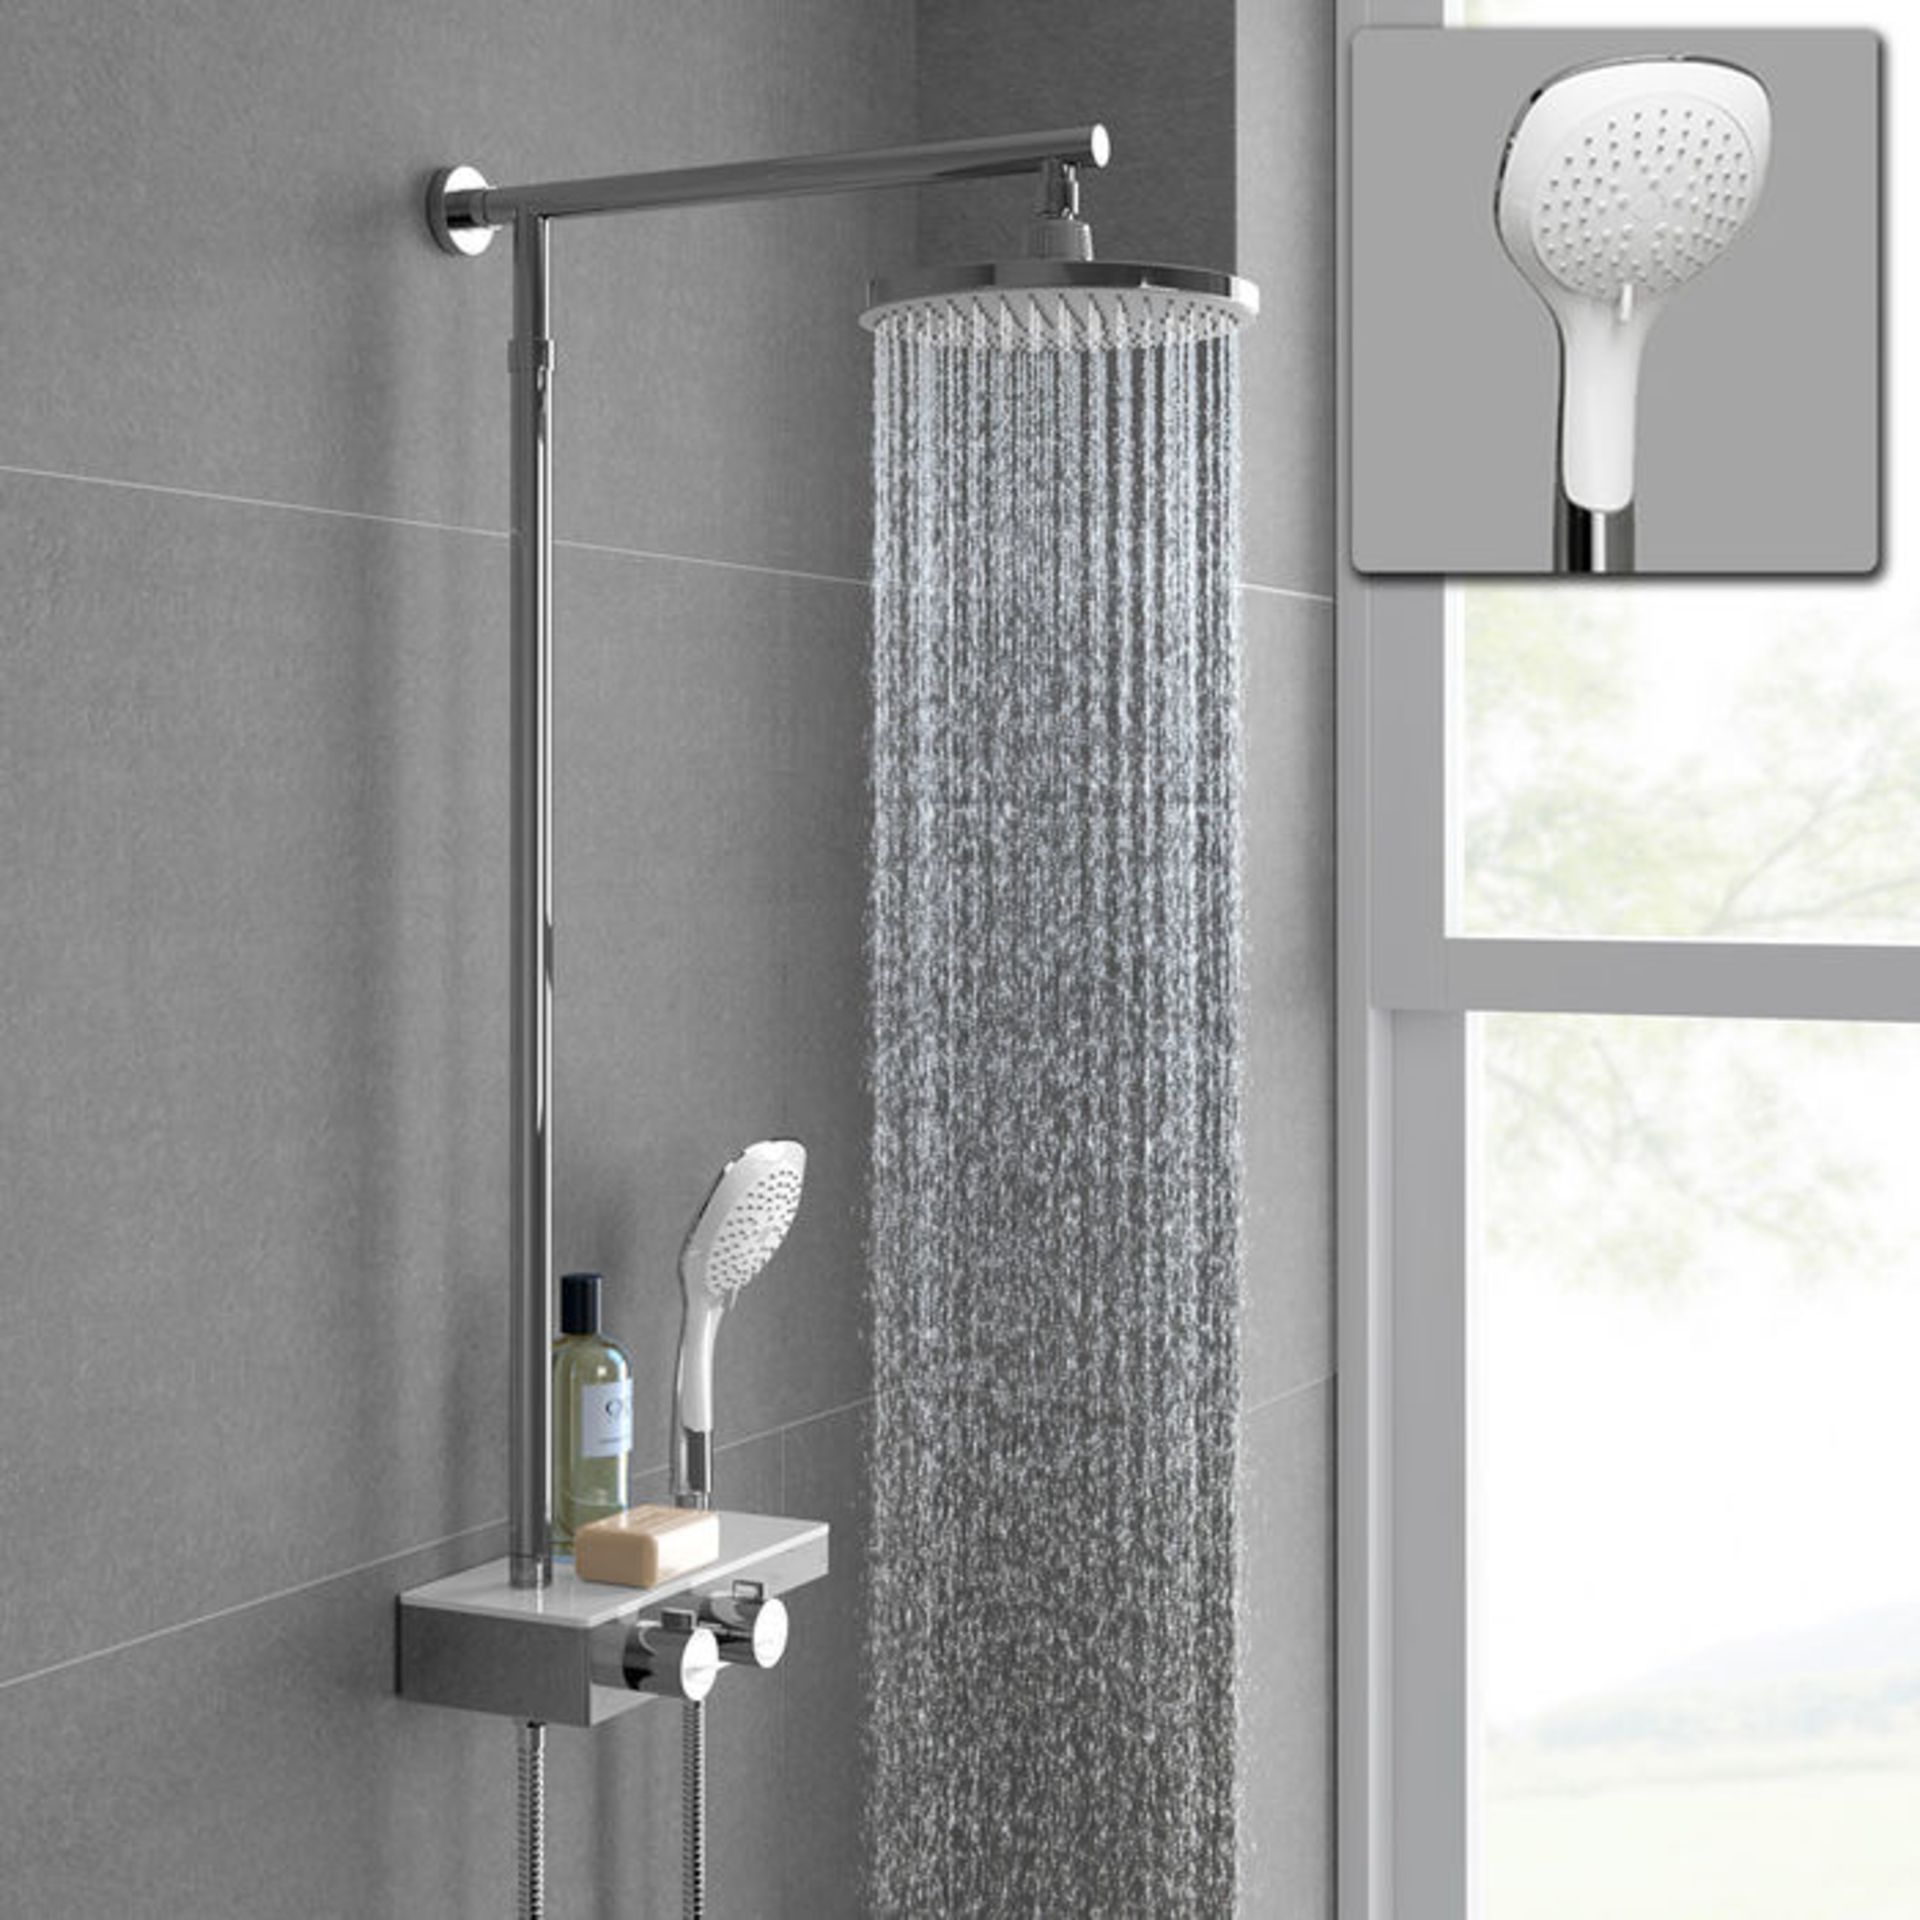 (AH98) Round Exposed Thermostatic Mixer Shower Kit Medium Head & Shelf. Cool to touch shower for